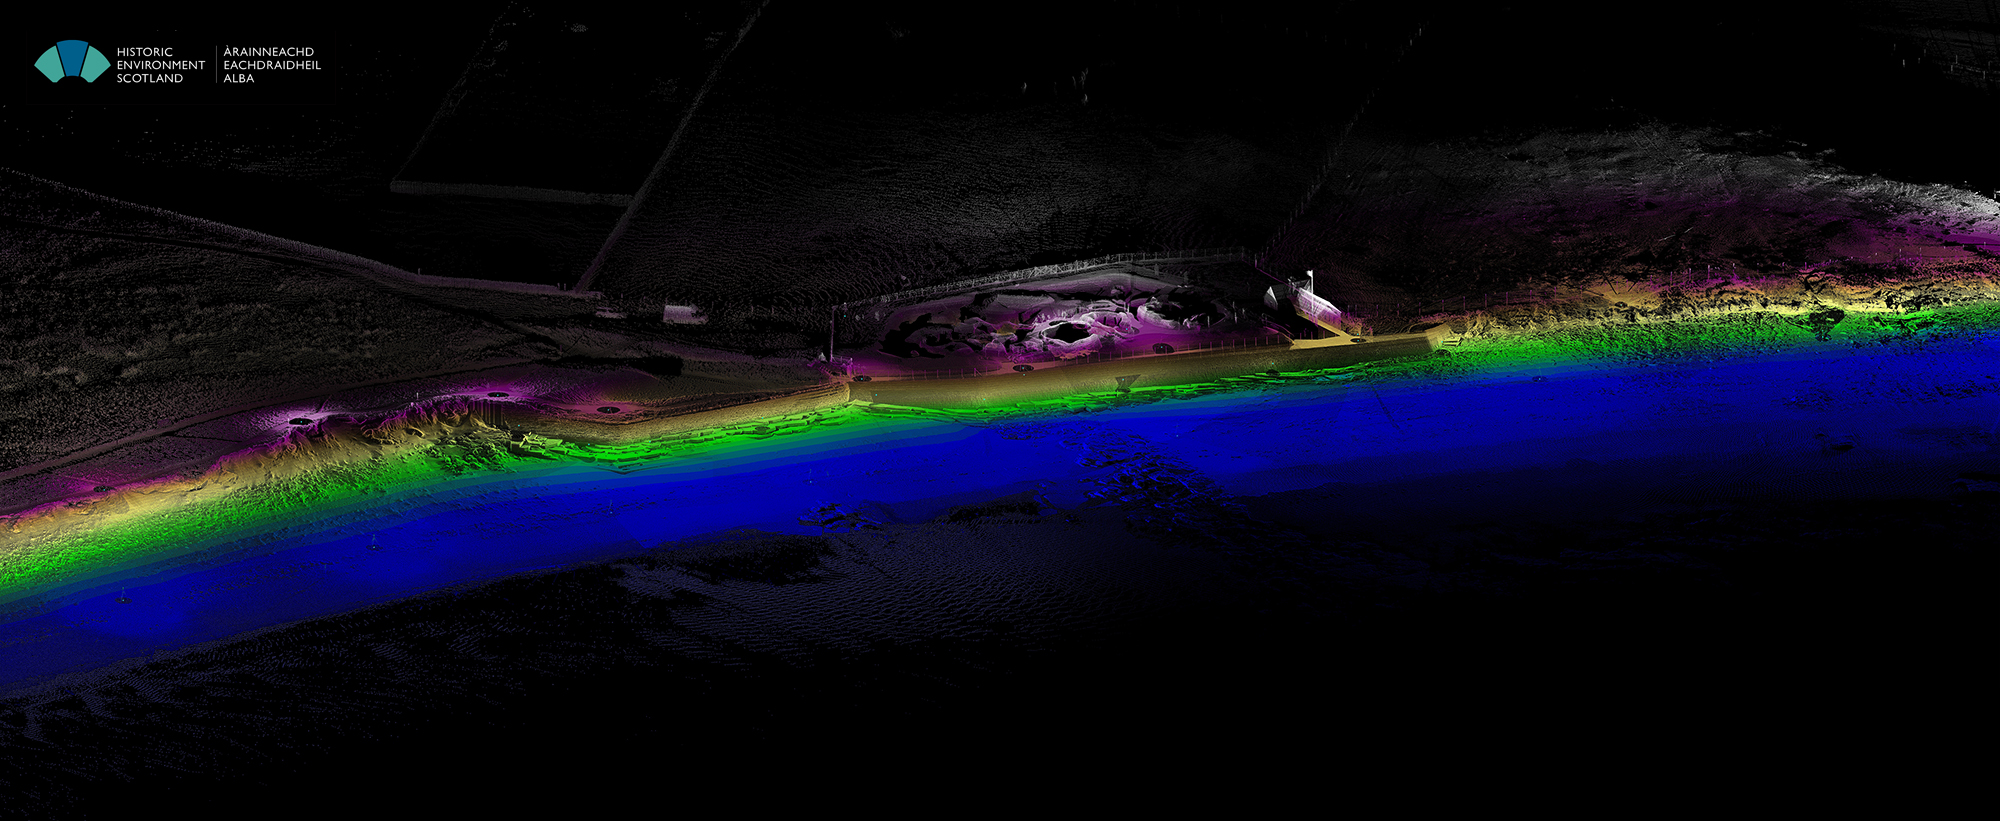 View of the point cloud from the NE, coloured by elevation: blue for the lowest points and white for the highest.